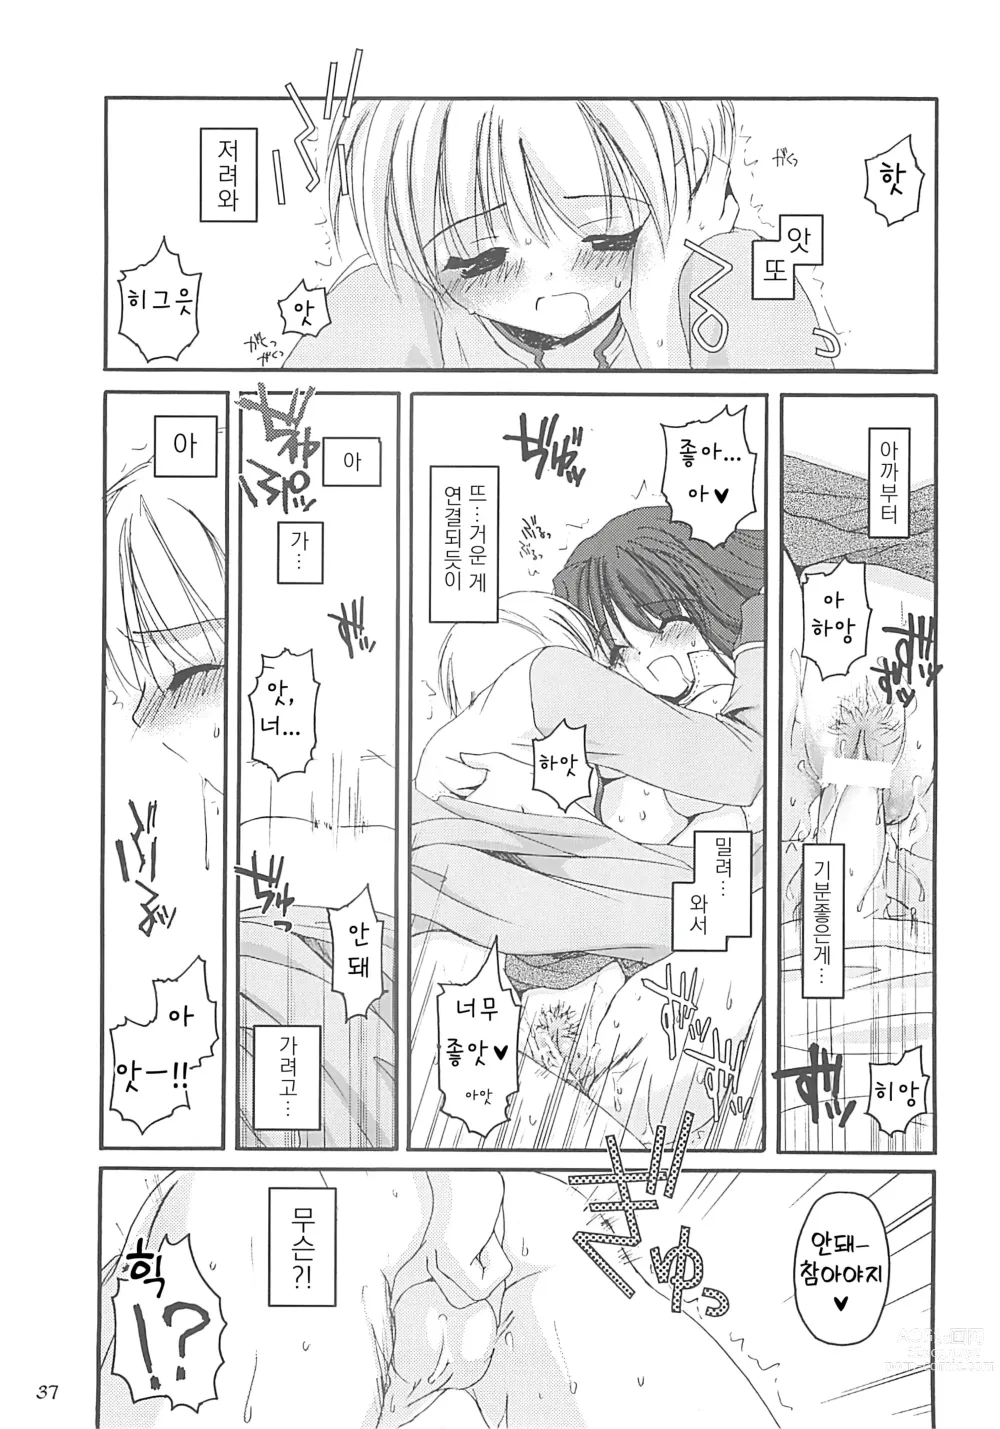 Page 36 of doujinshi D.L. Action 13